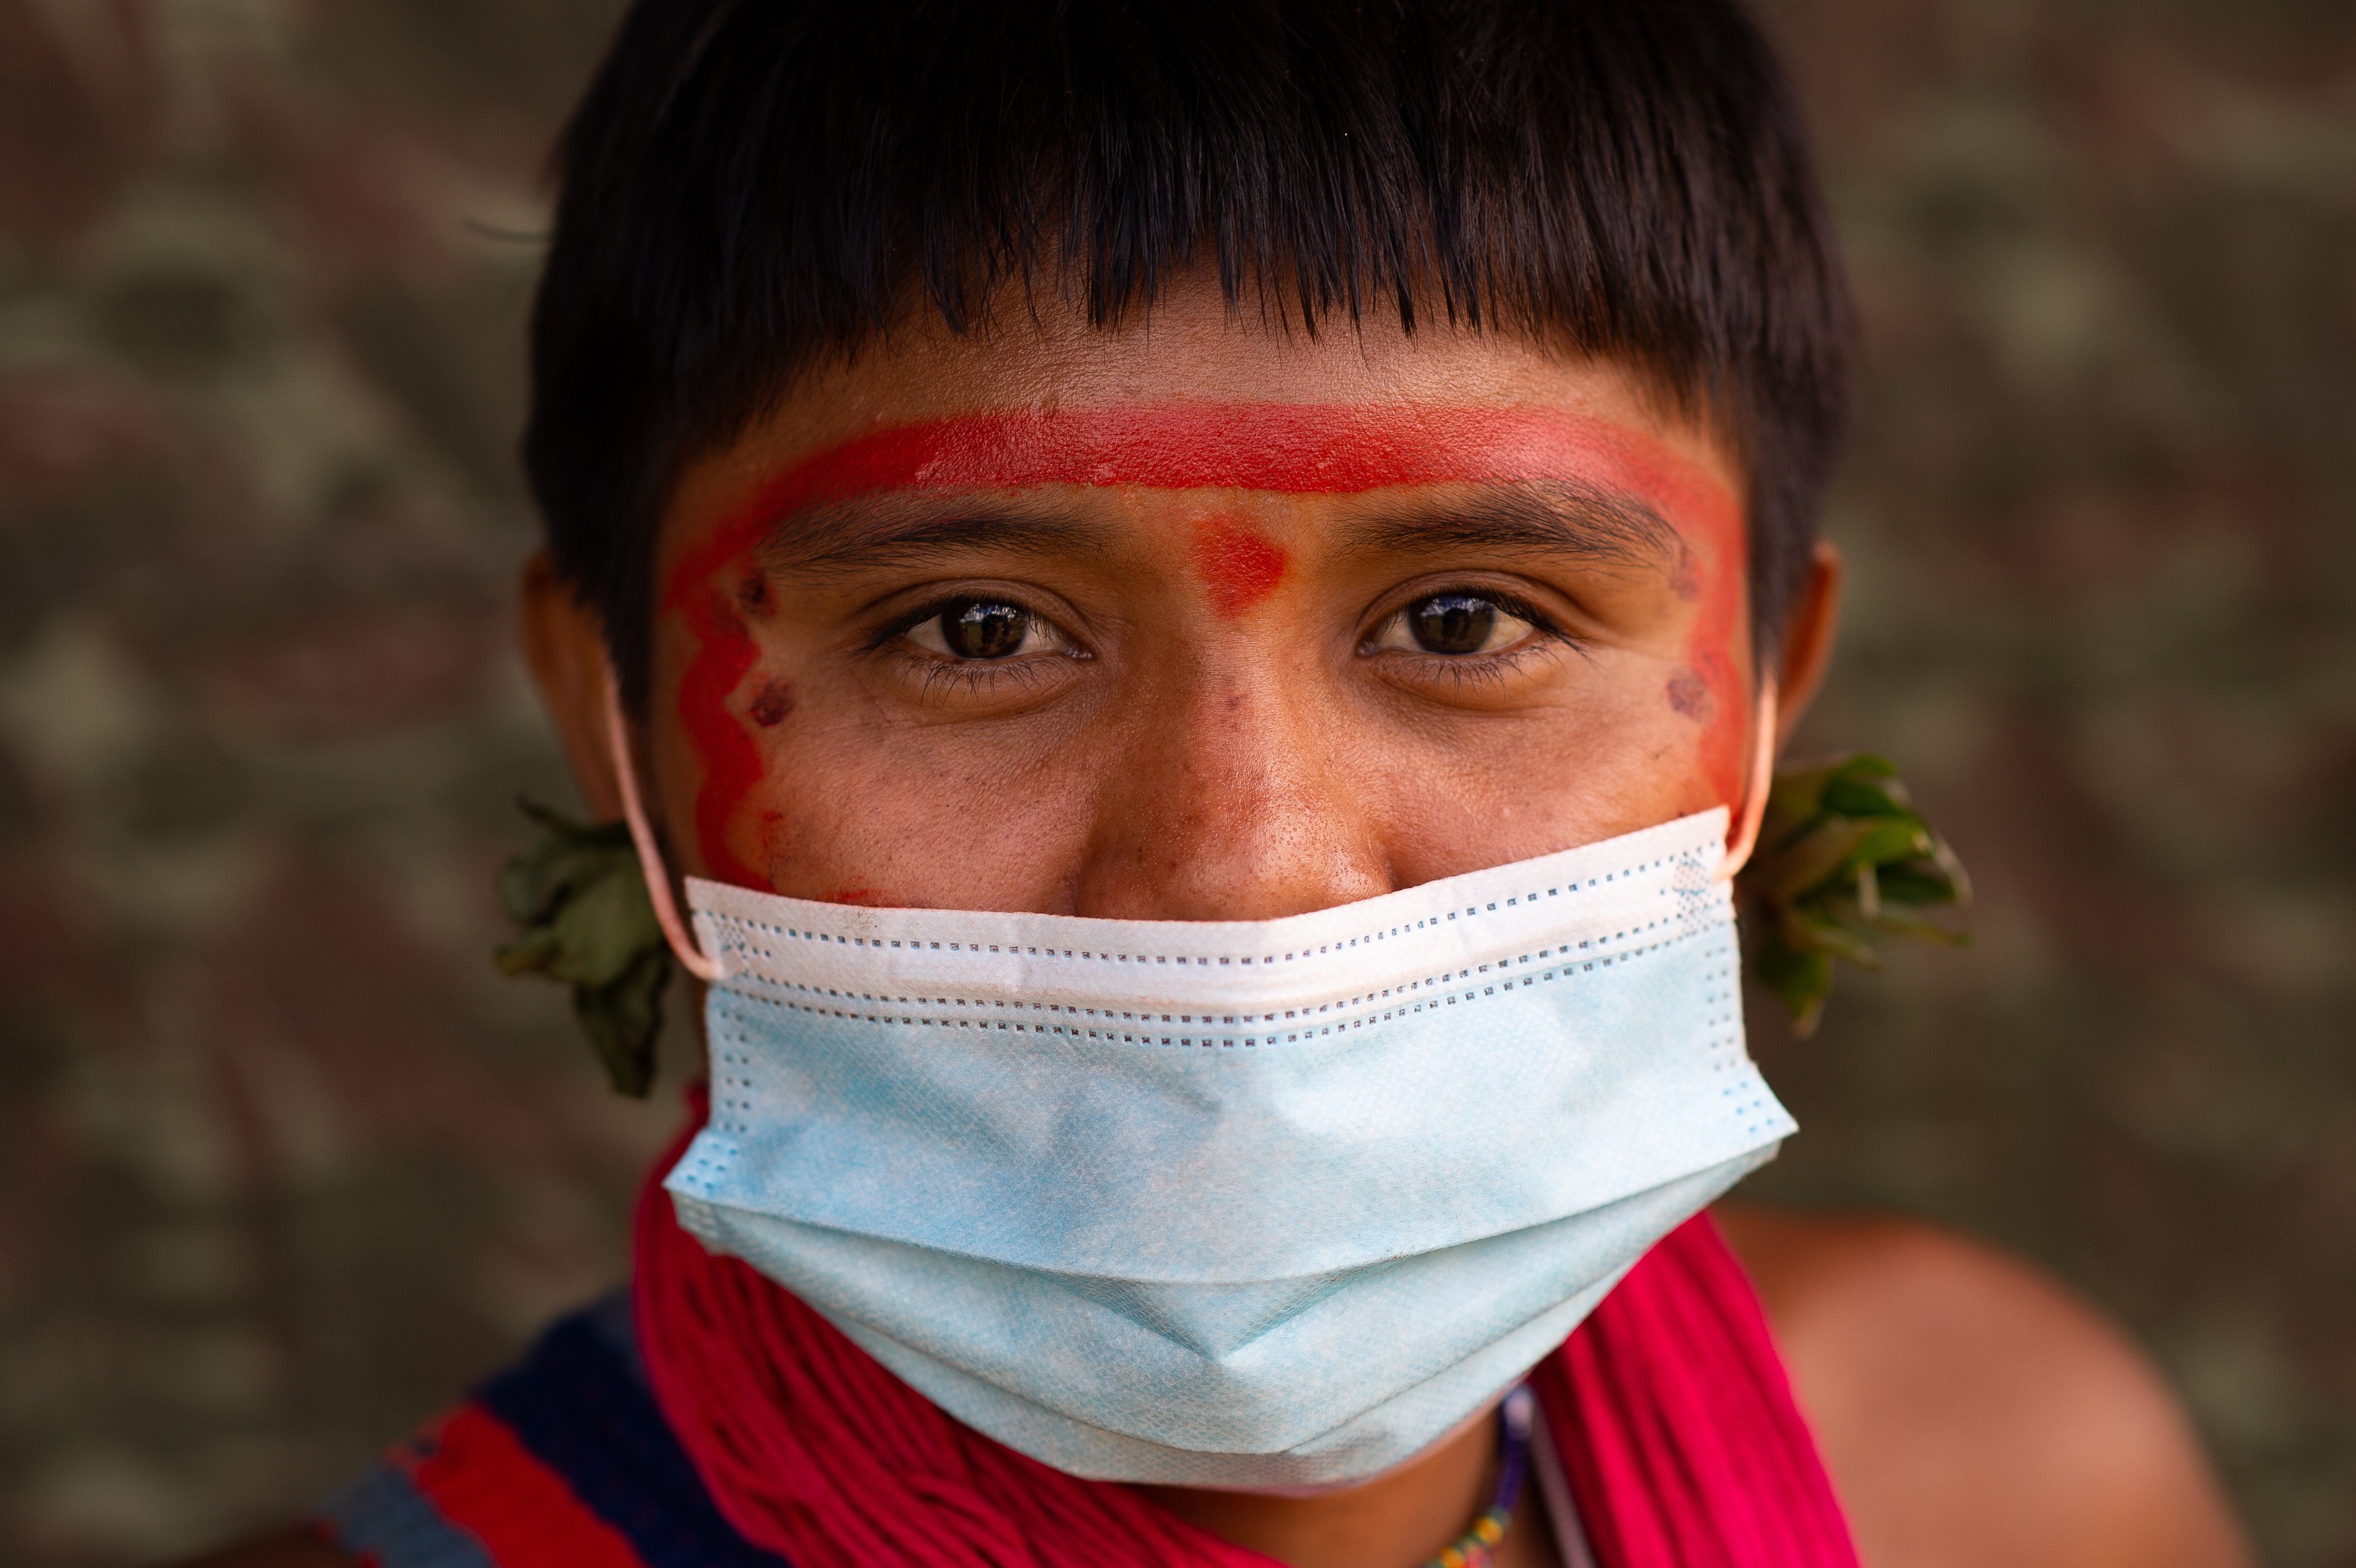 ALTO ALEGRE, BRAZIL - JULY 01: Yanomami woman wears protective mask to receive health care during the Yanomami / Raposa Serra do Sol Mission amidst the coronavirus (COVID-19) pandemic at the 4 Special Border Squad on July 01, 2020 in Surucucu, Alto Alegre (Foto: Getty Images)